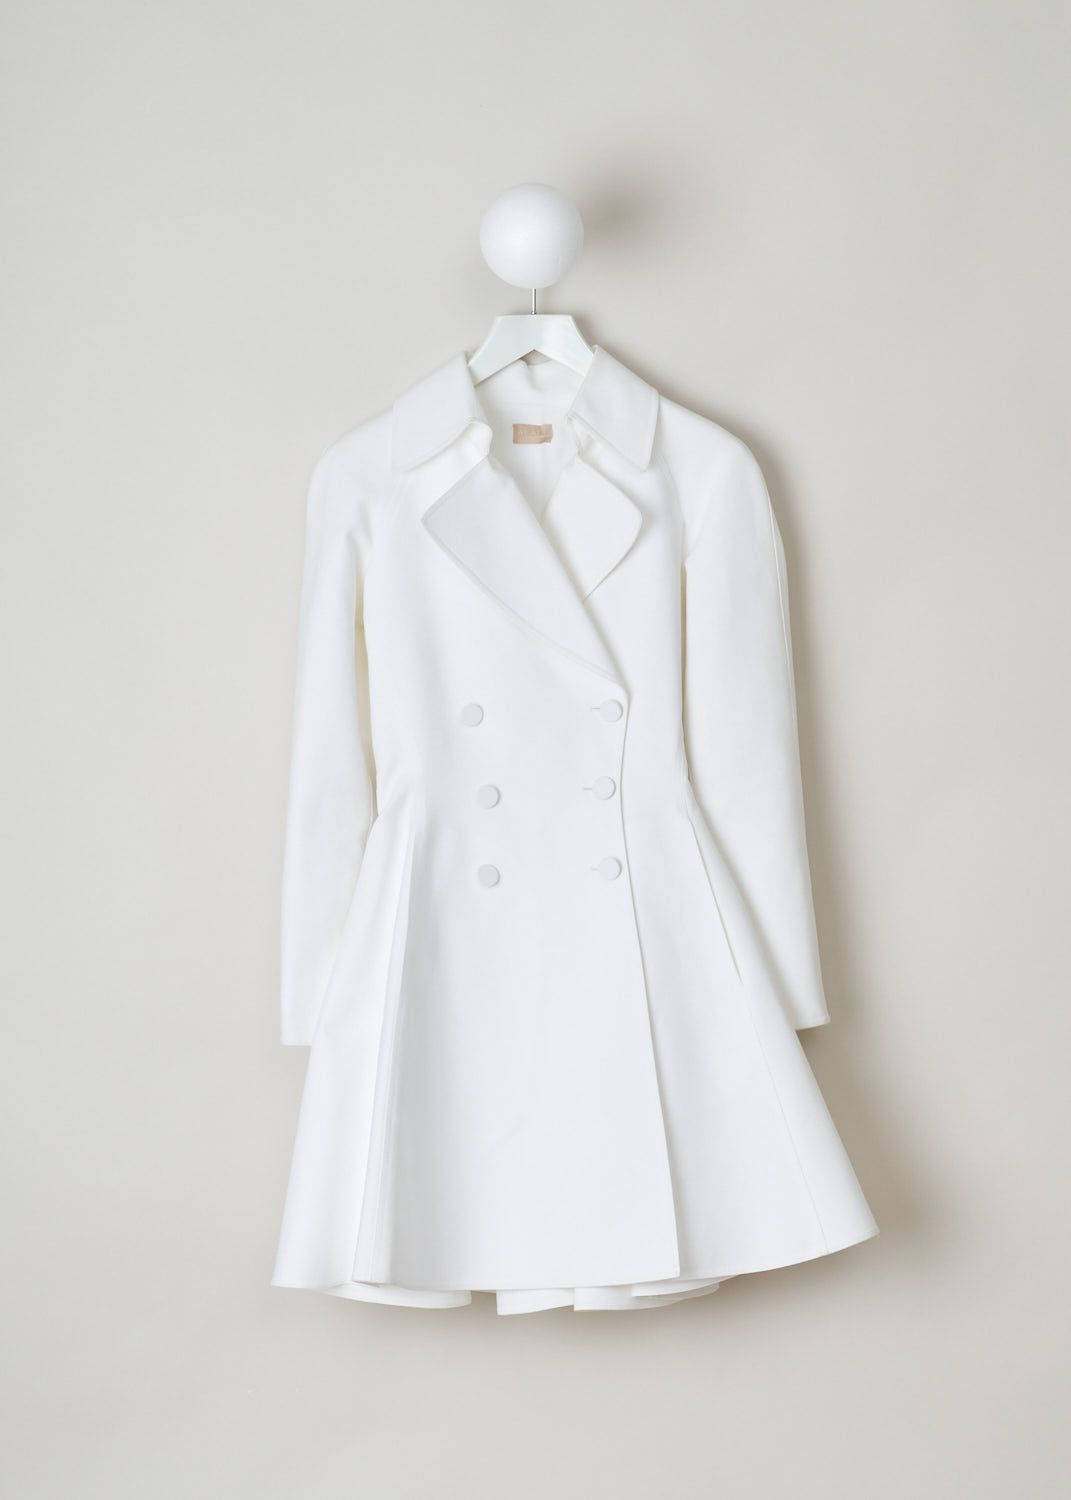 AlaÃ¯a, White pique woven double breasted coat, 2E9M052RT005_manteau_ML_C000_blanc, white, front. White pique woven fabric turned into this gorgeous coat. Featuring a wide collar which leads into a wide notch lapel, going further down you will find the double breasted fastening option and also the concealed pockets. This model sits fitted above the waist and flares out below it. 